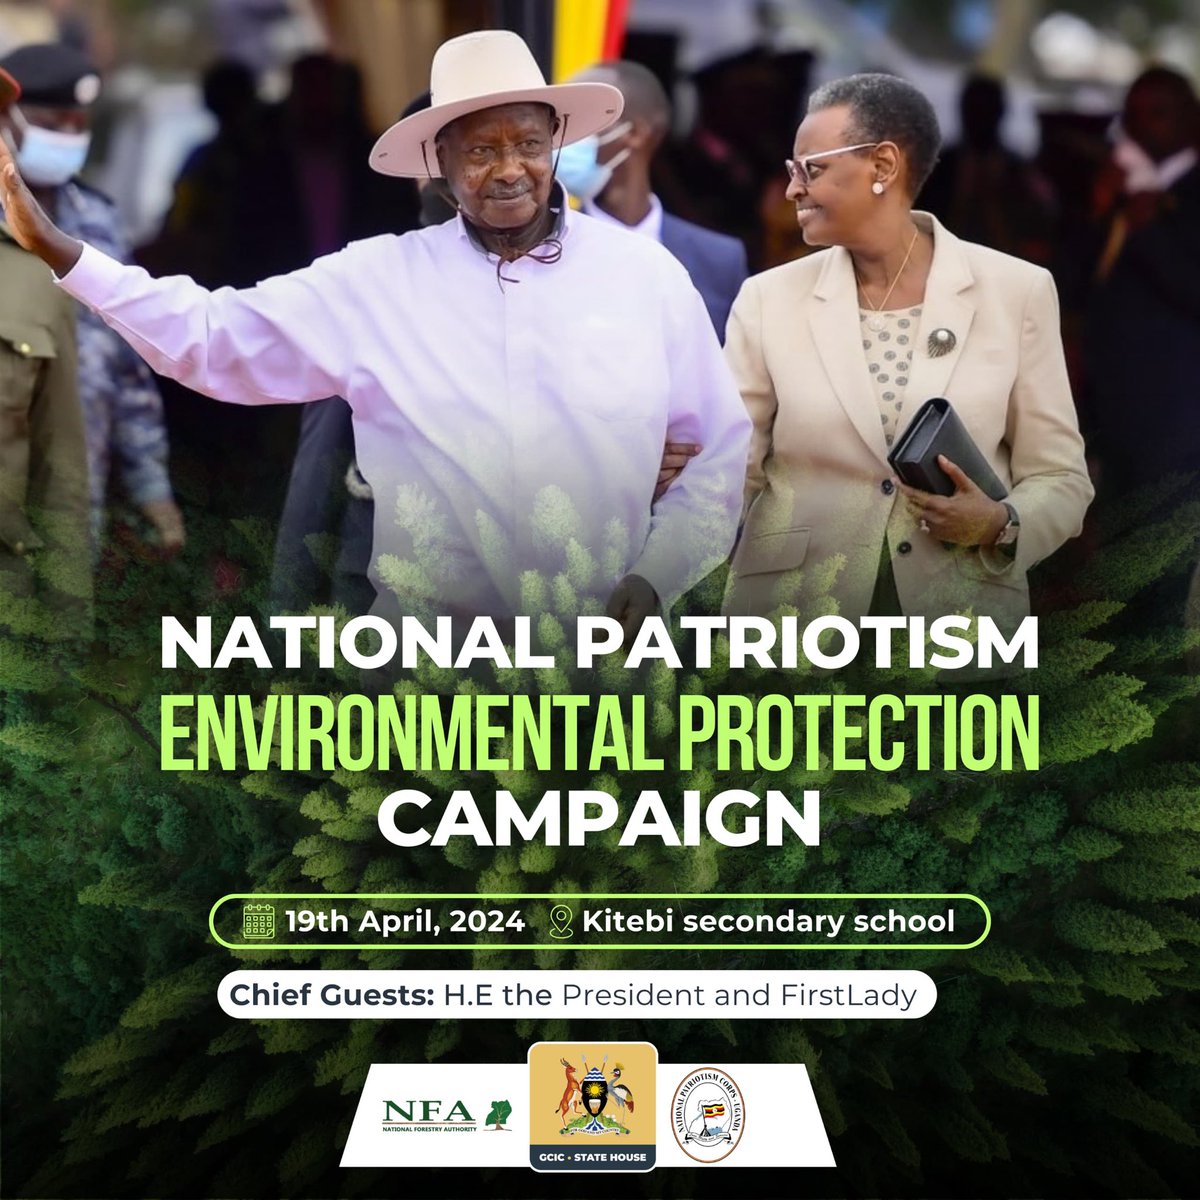 Tomorrow, the President is set to launch National Patriotism Environmental Protection Campaign at Kitebi Secondary School. The Campaign’s objective is to raise awareness, educate &inspire action for nature conservation &effective environmental management. #EnvironmentalProtection